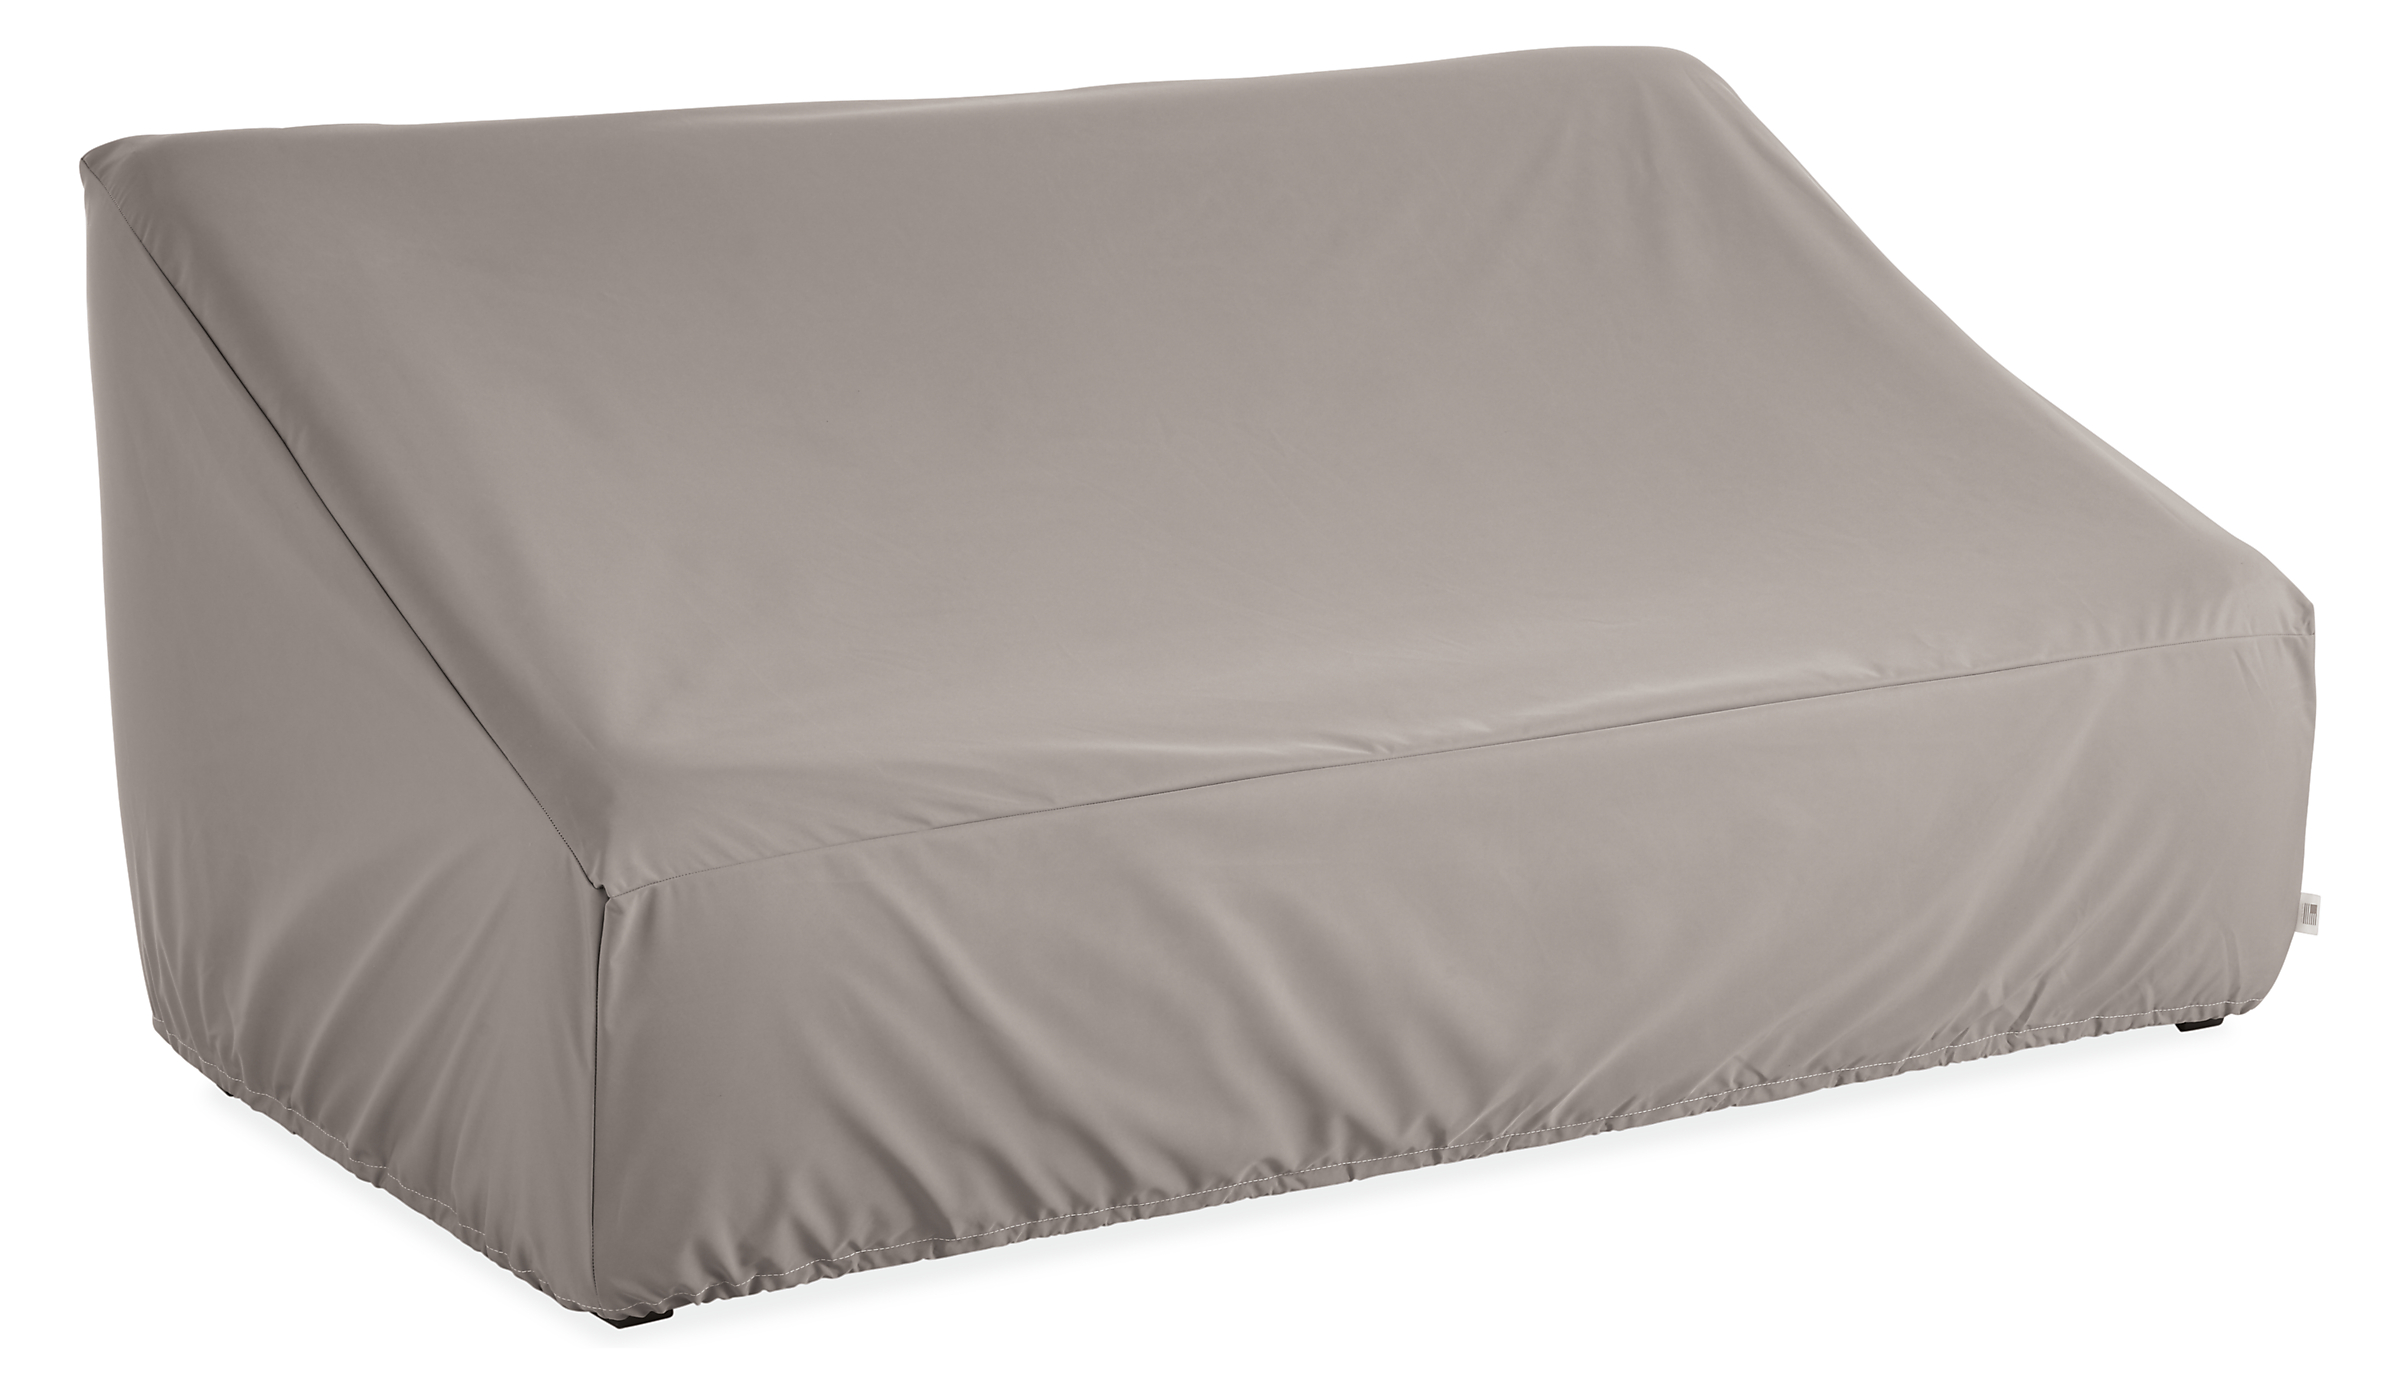 Outdoor Cover for Sofa 99w 39d 27h with Drawstring